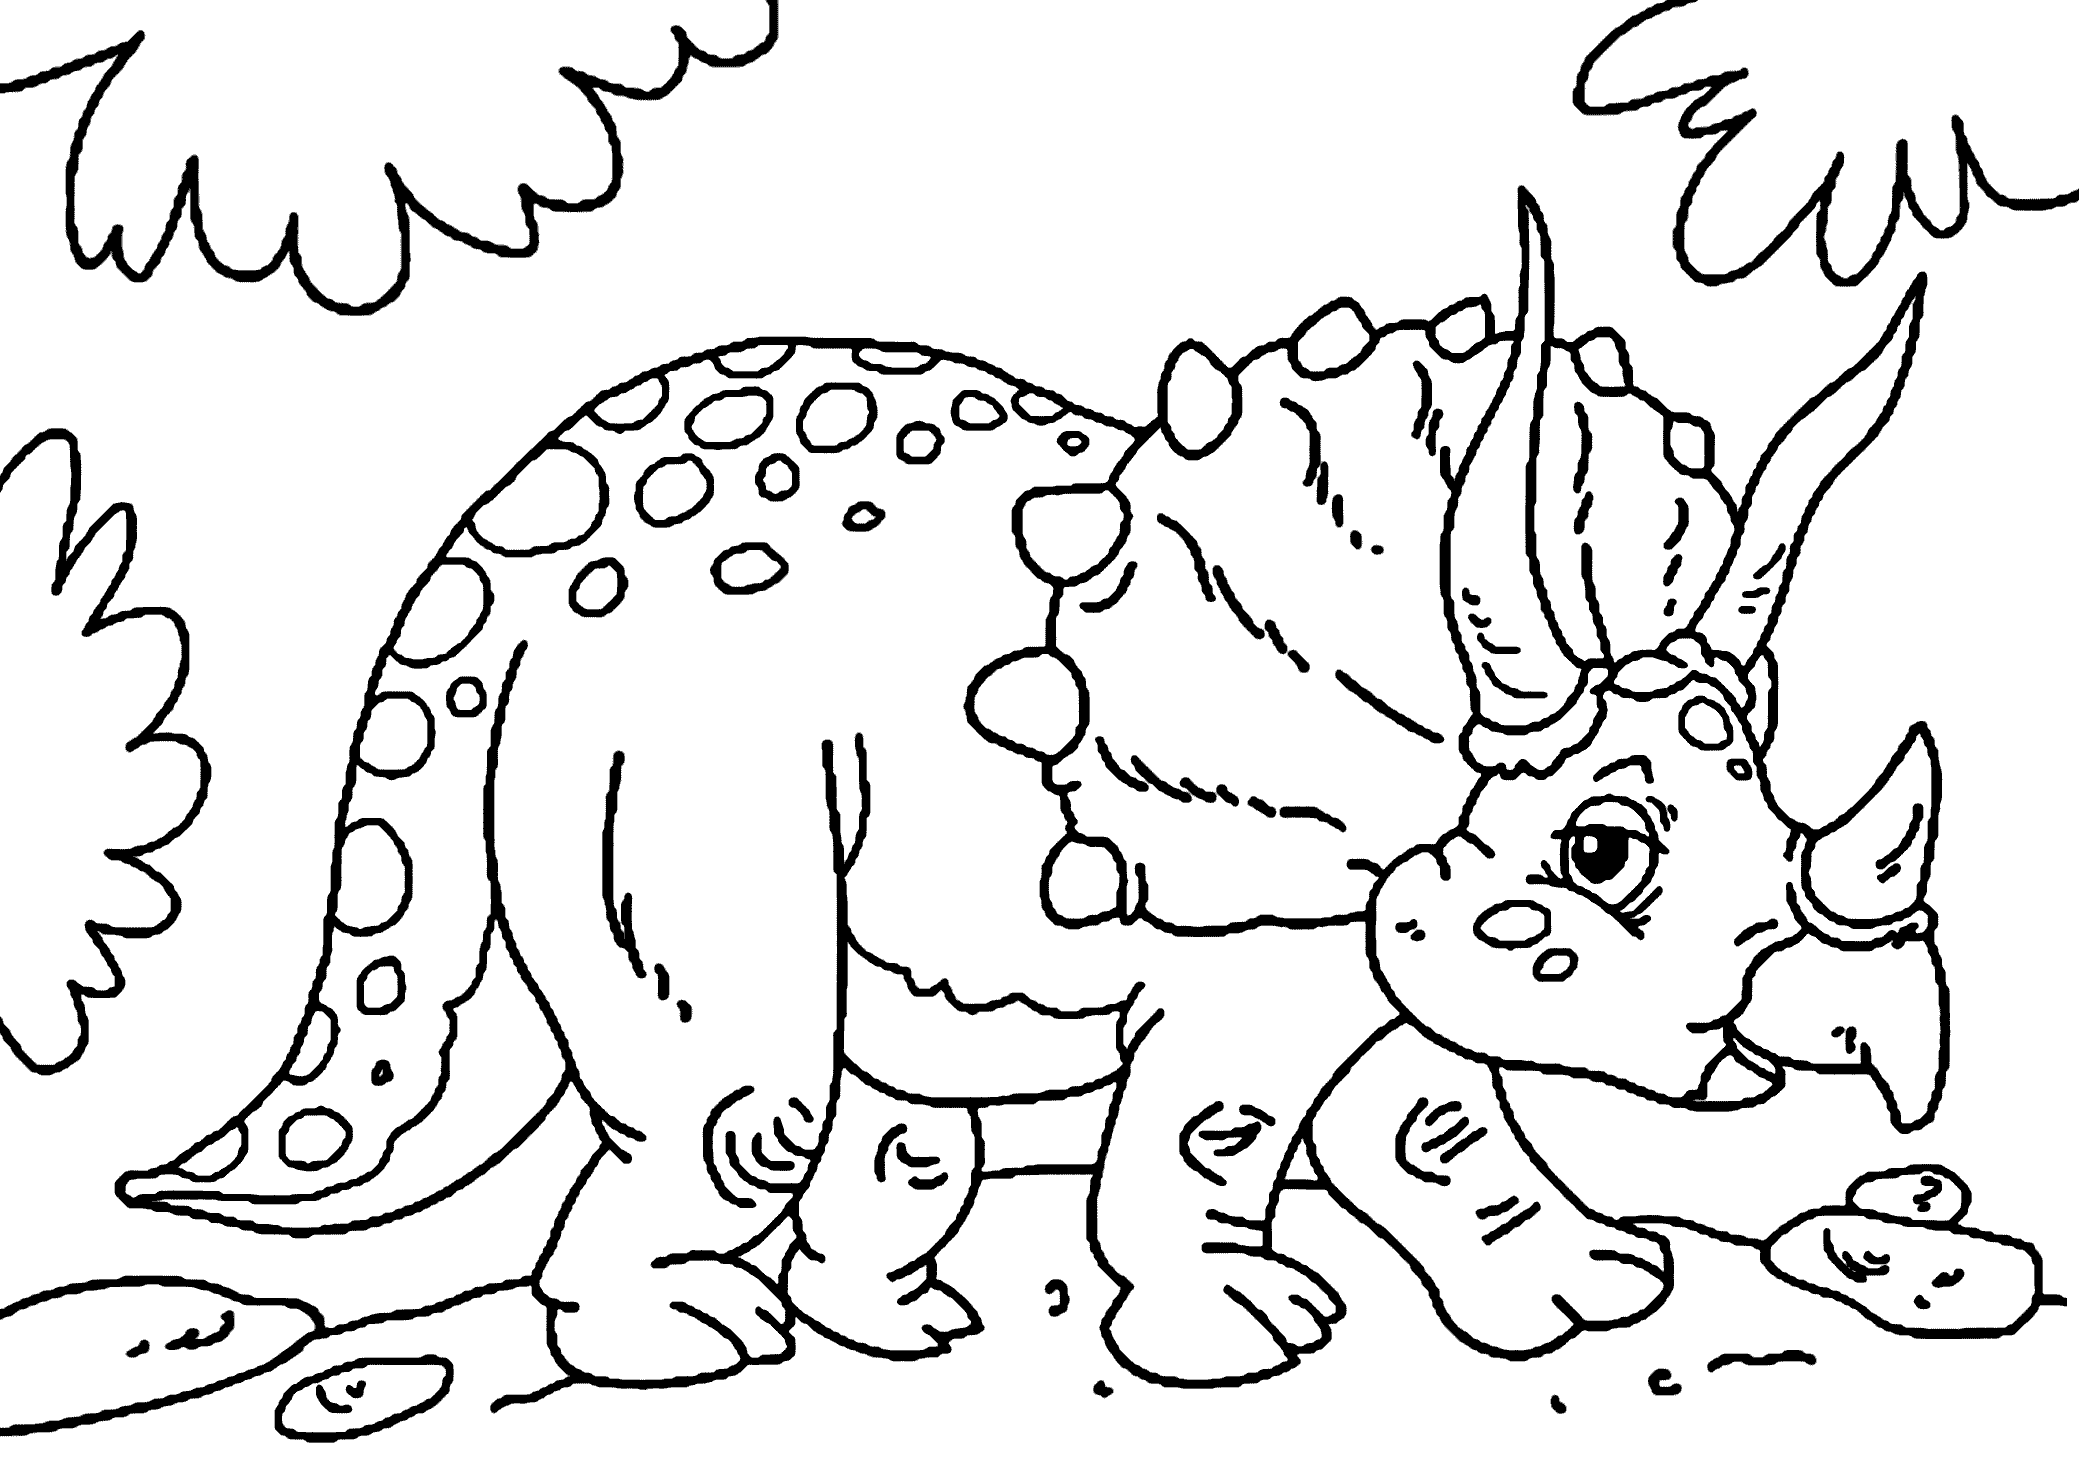 Cute little triceratops dinosaur coloring pages for kids printable free dinosaur coloring pages dinosaur coloring sheets dinosaur coloring